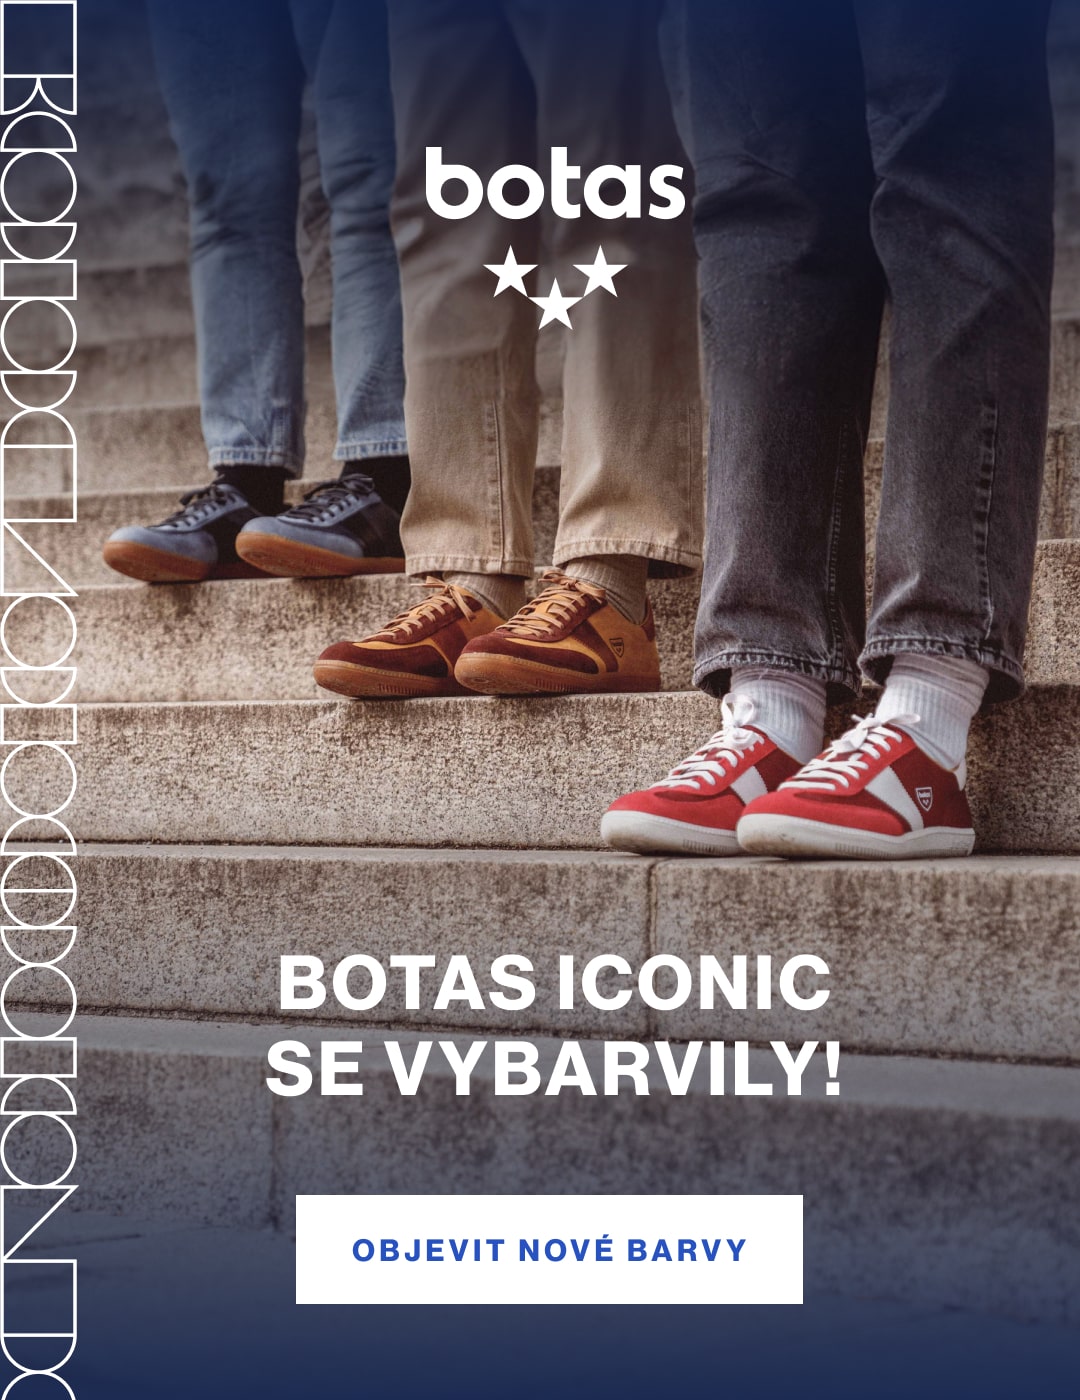 Botas Iconic se vybarvily!